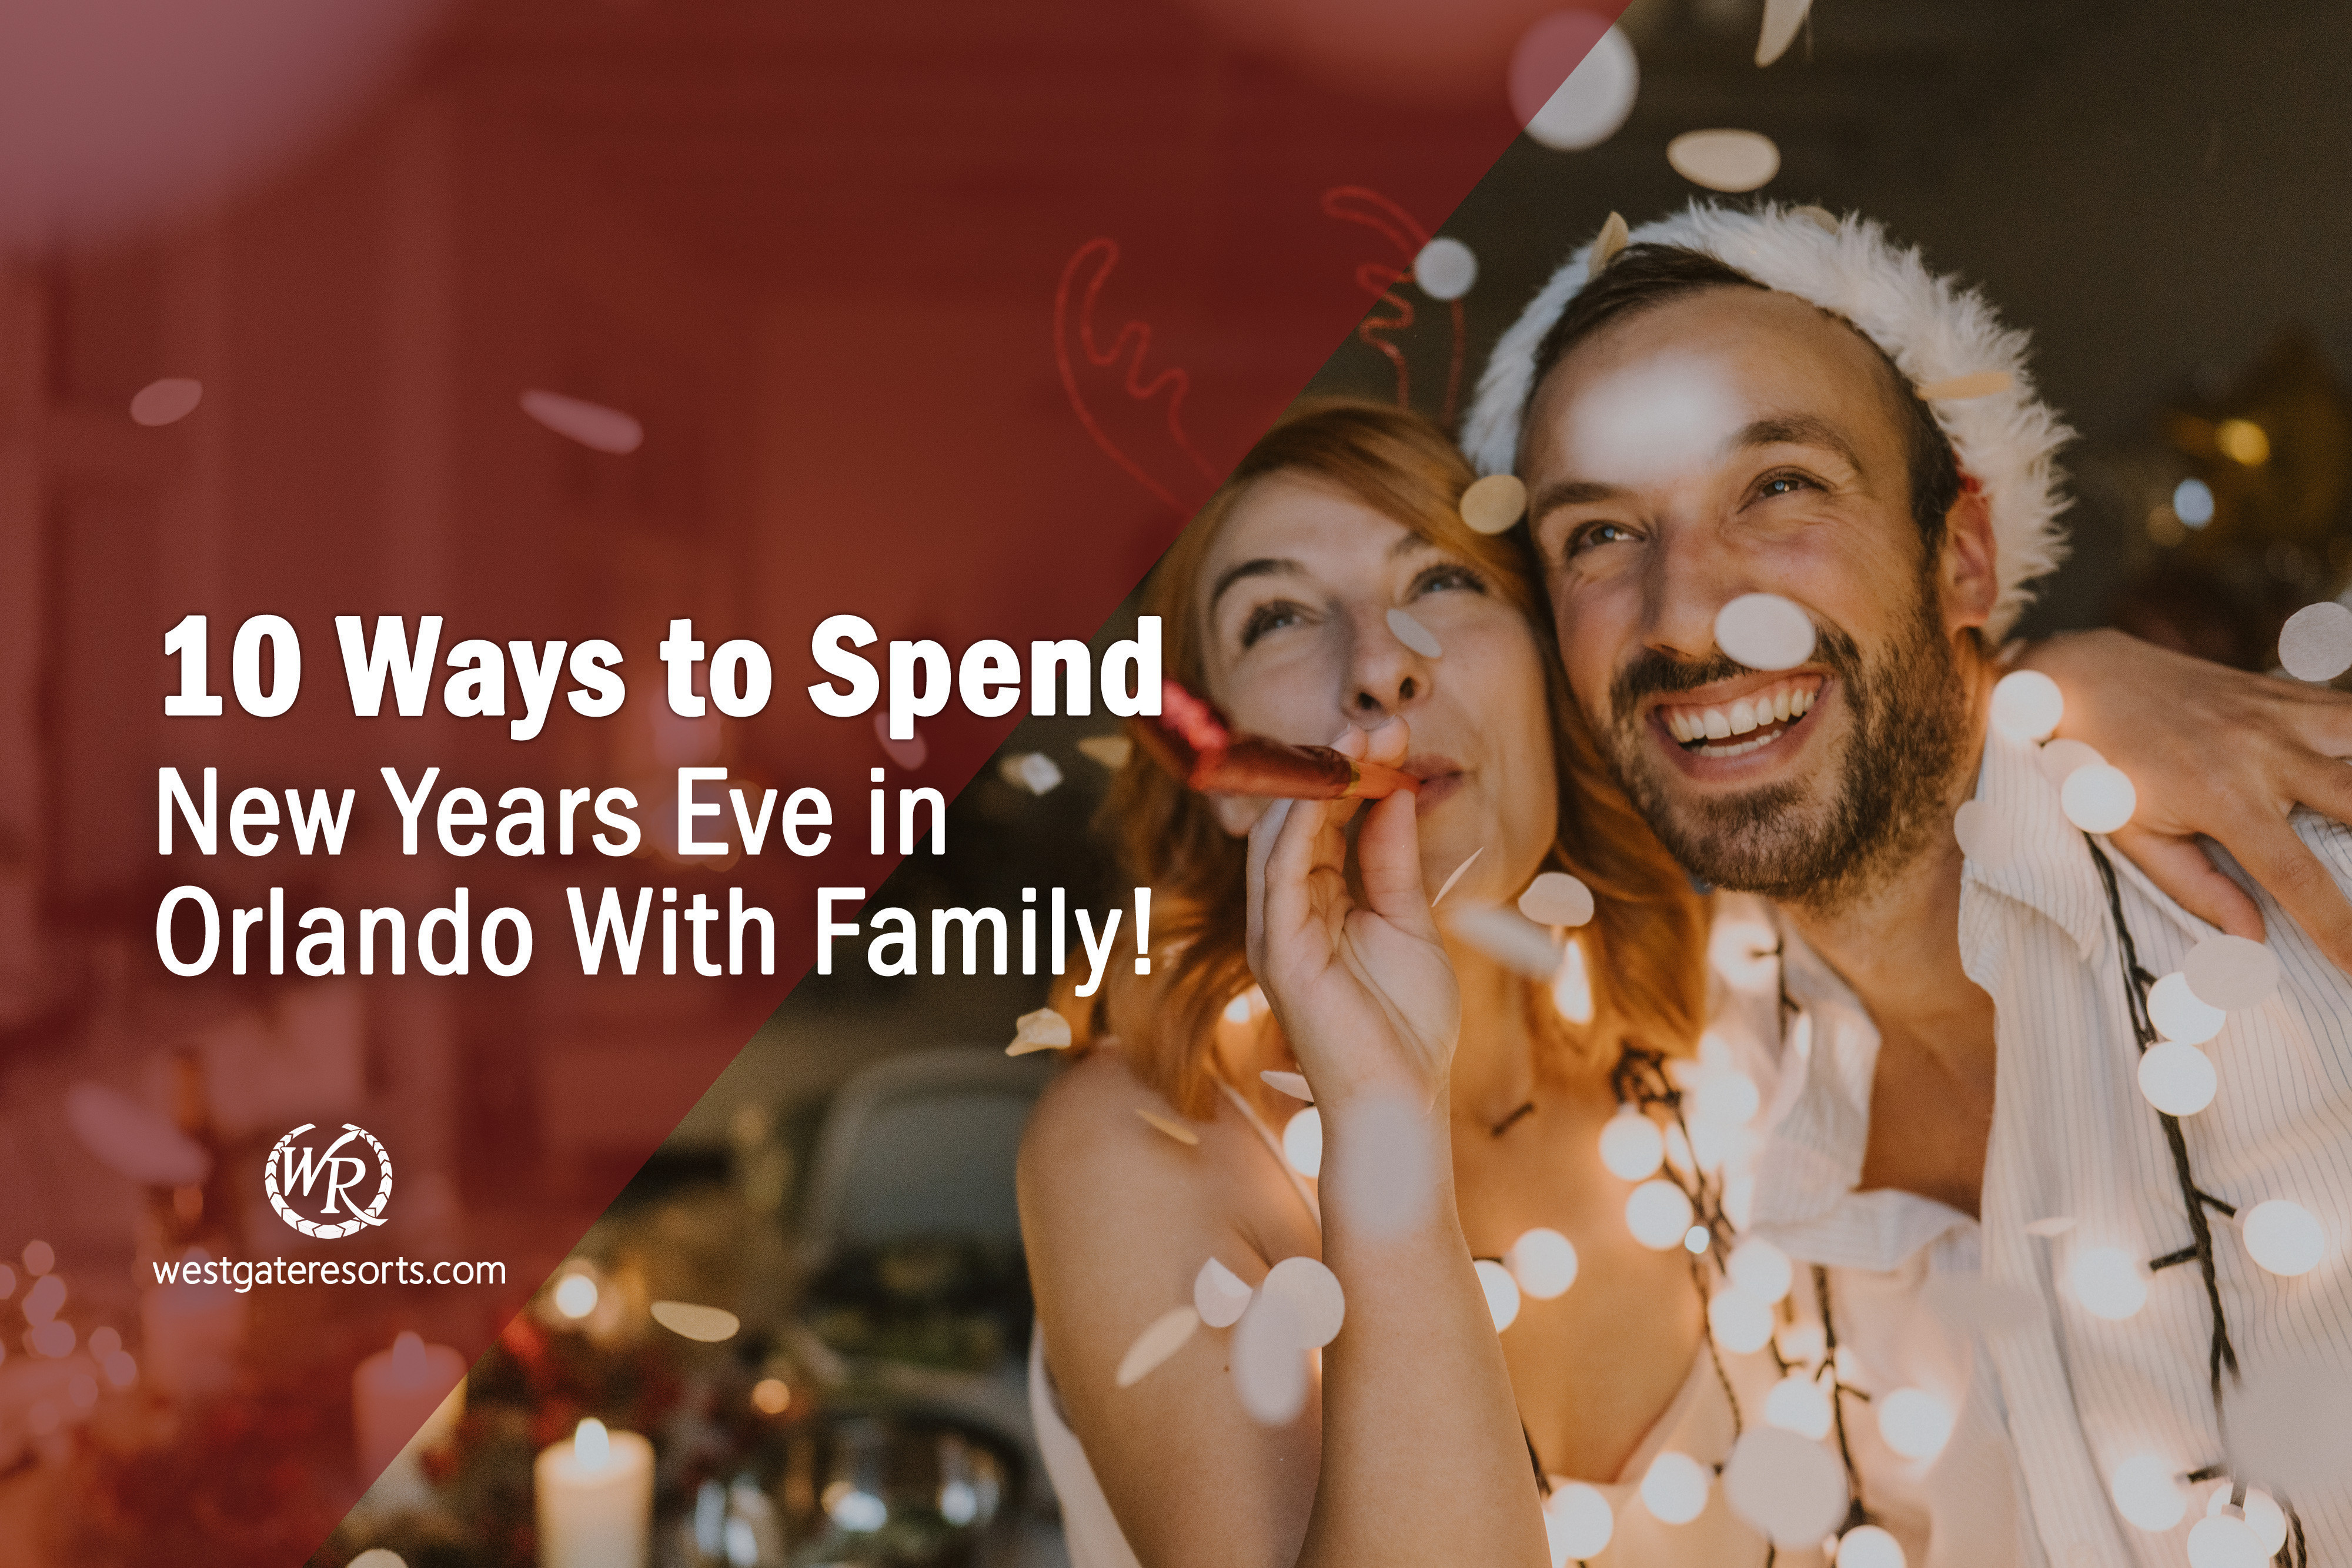 10 Ways to Spend New Year's Eve in Orlando With Family!